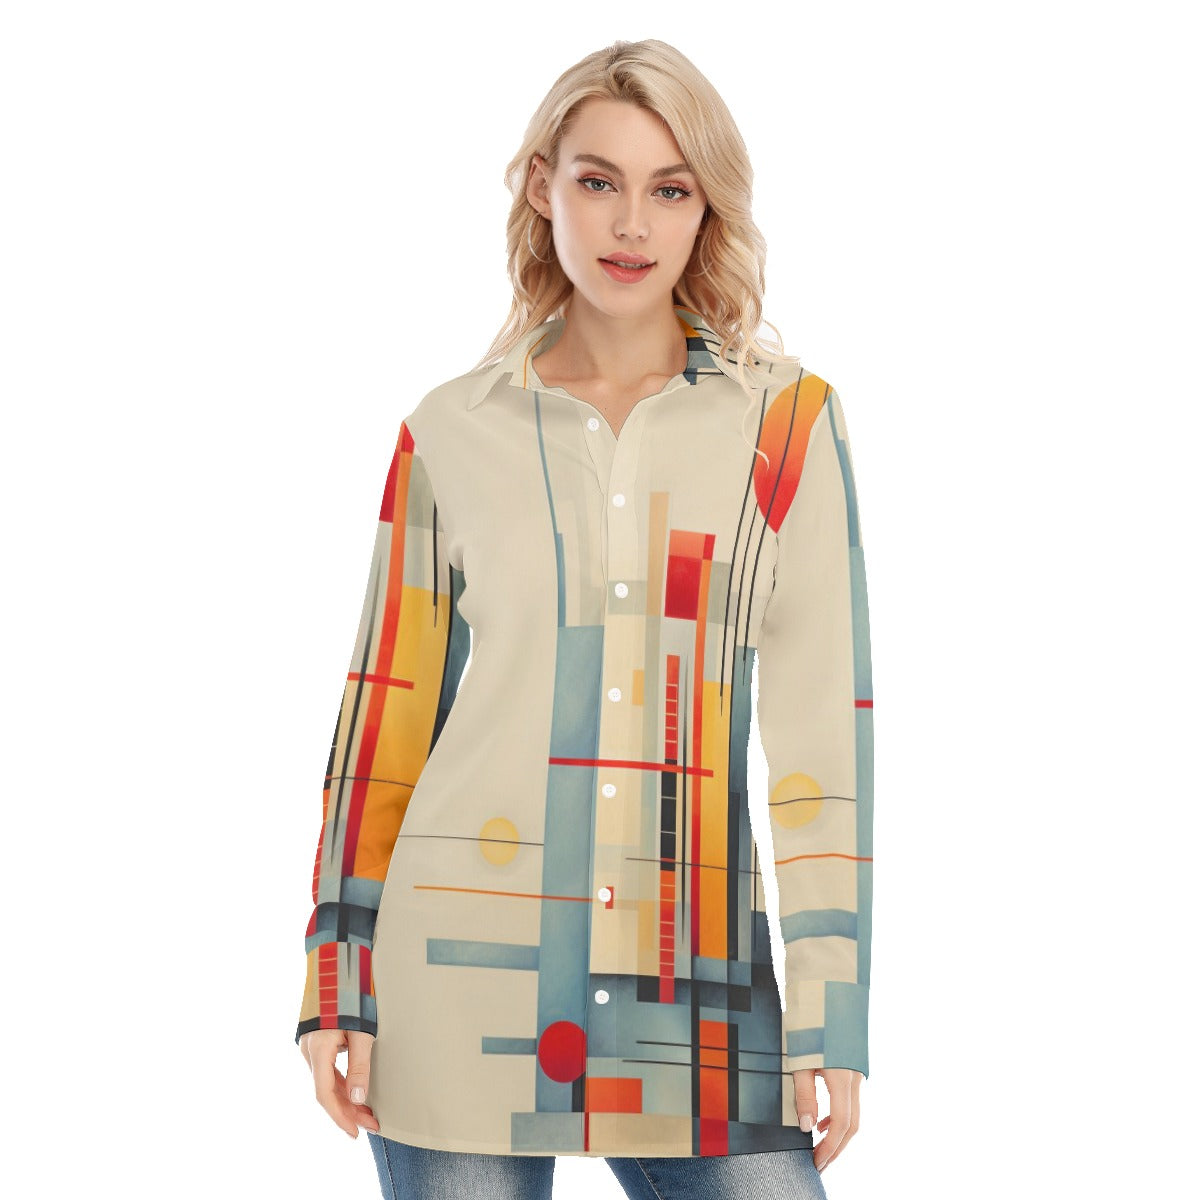 3R9G7 All-Over Print Women's Long Shirt |115GSM 98% Cotton and 2% spandex